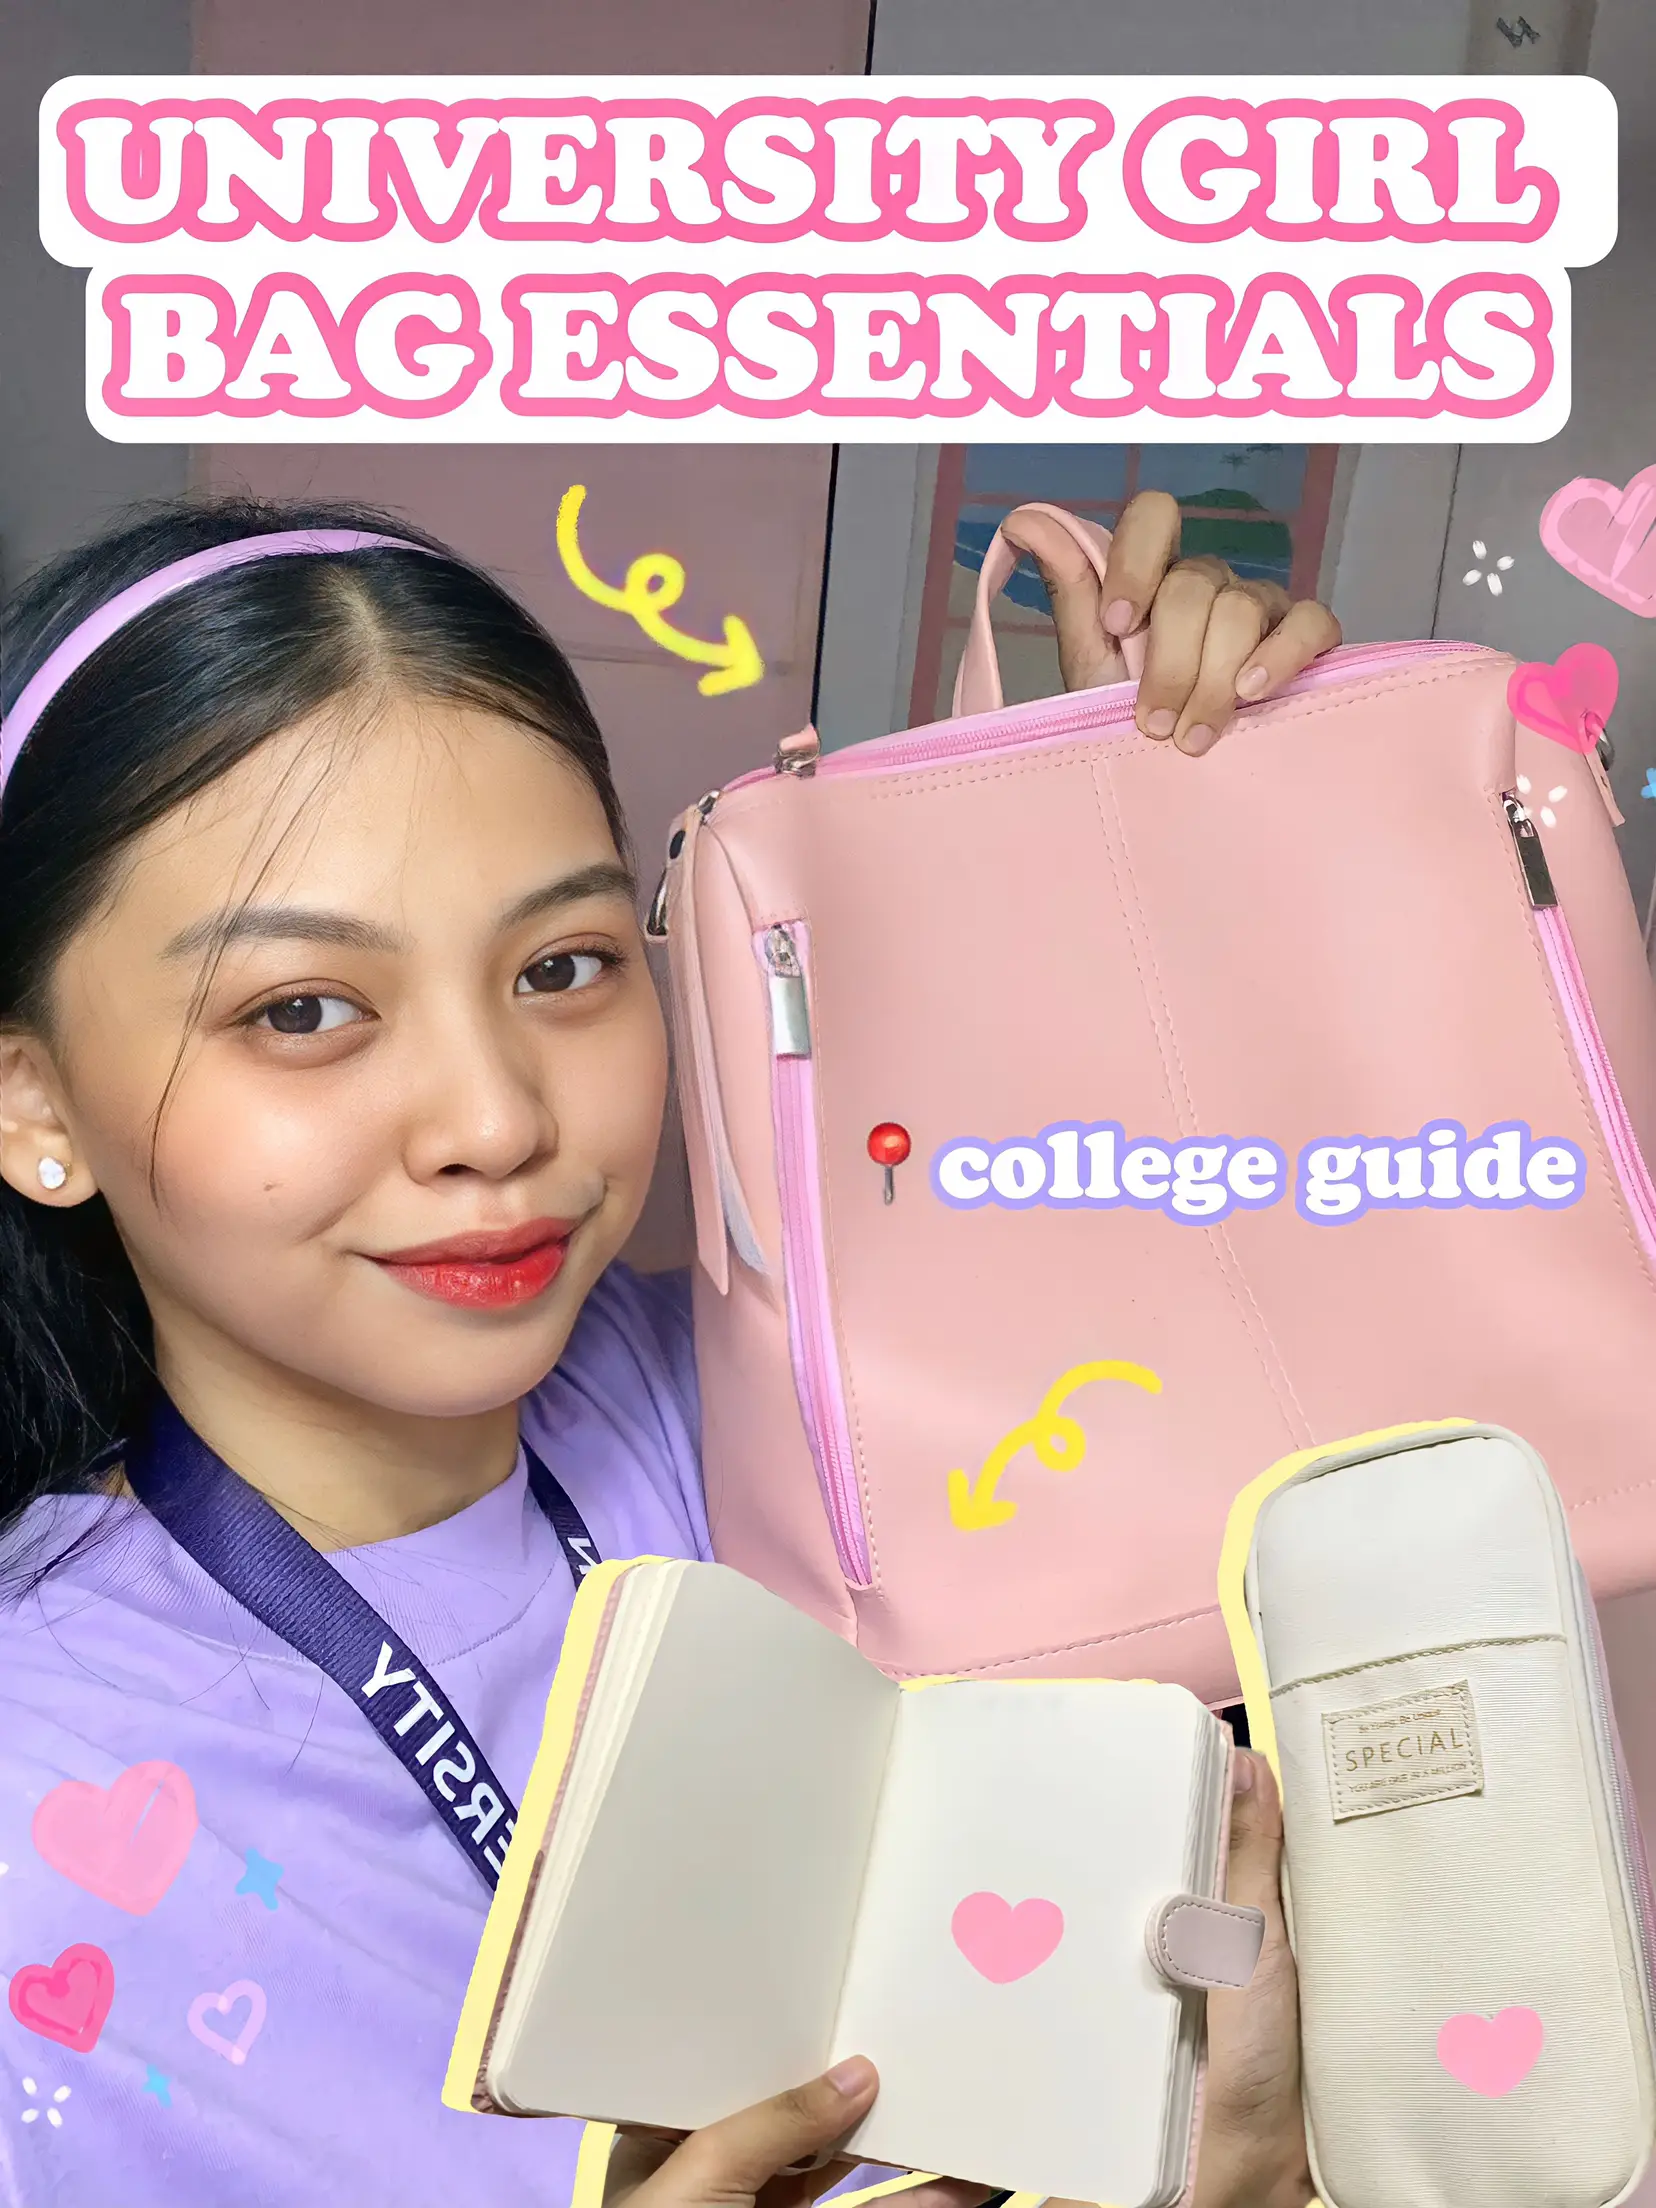 Clean Girl Bag Essentials 🤍, Gallery posted by iammarta